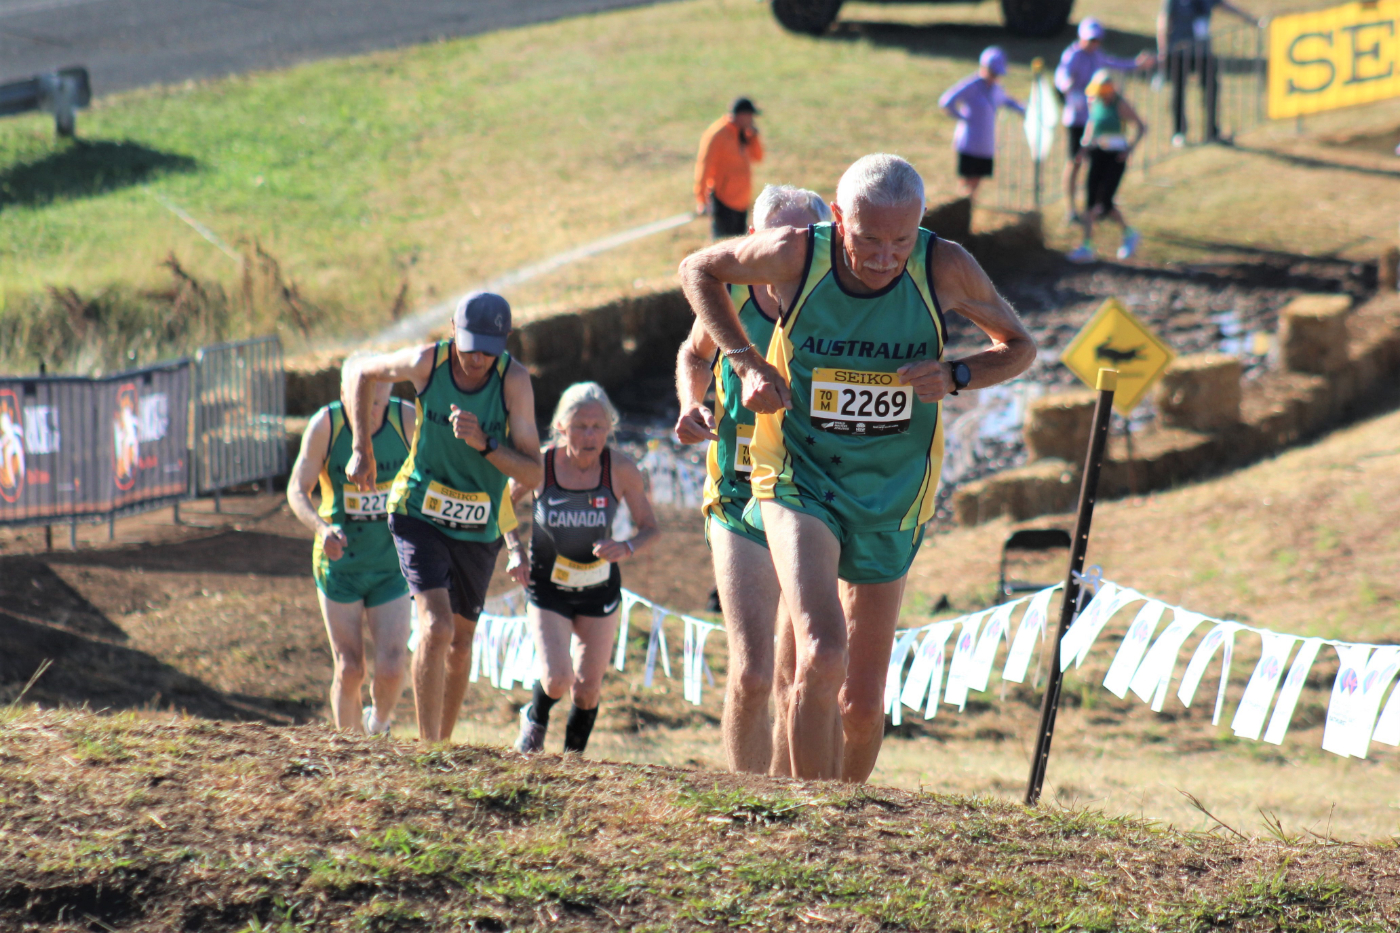 M70, Witold Krajewski leads other M70s, Roger Carter, Andrew Lee and Dennis Williams plus W70 Thelma Wright up the post mud hill during the 4k race.